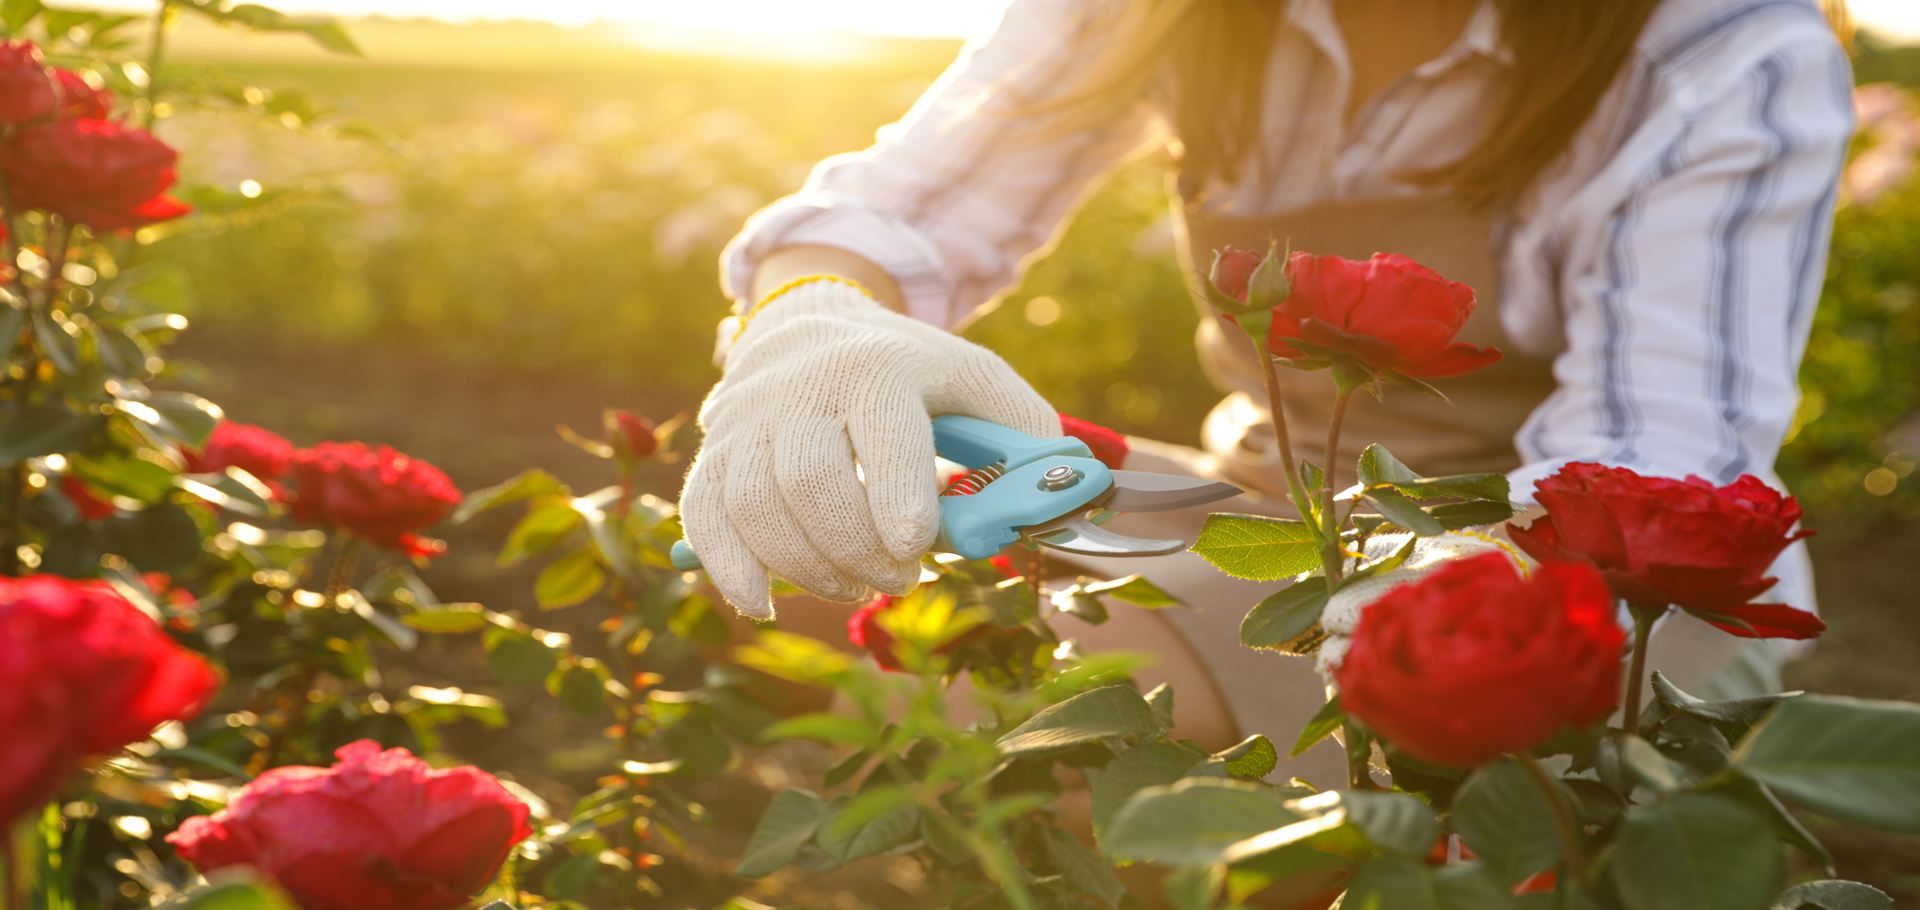 How To Prune A Rose Bush